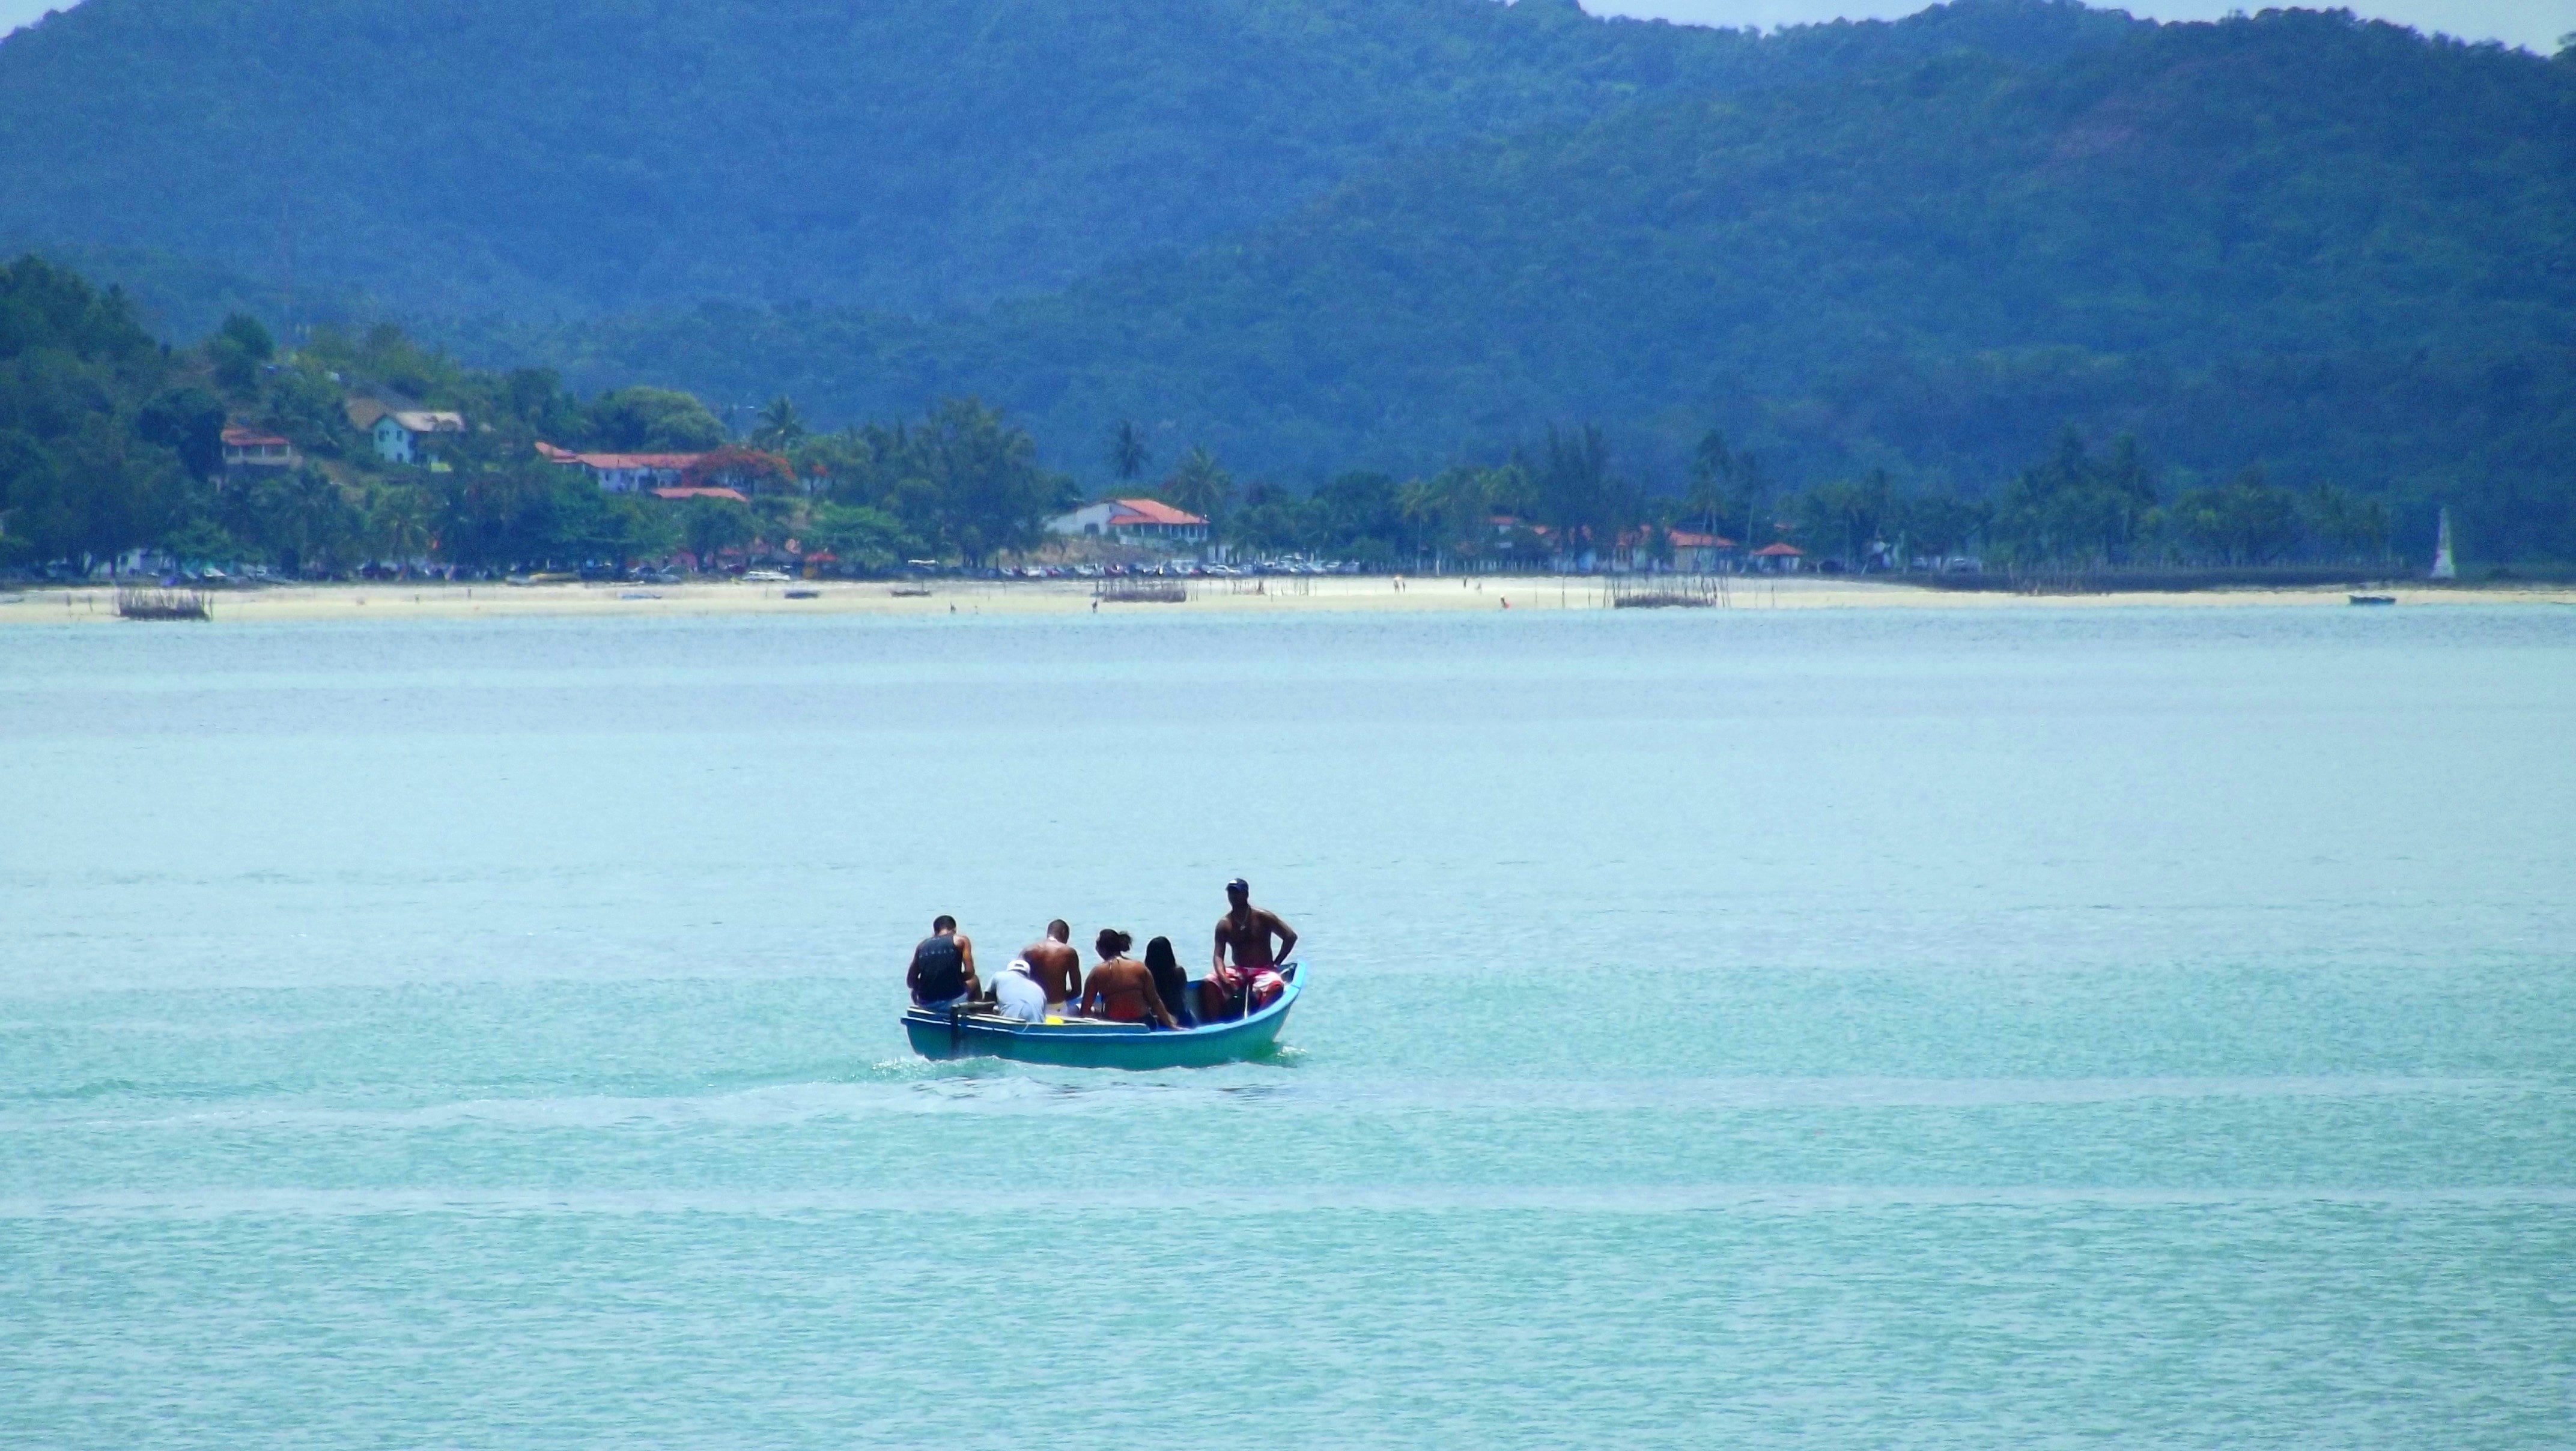 group of person on boat in body of water